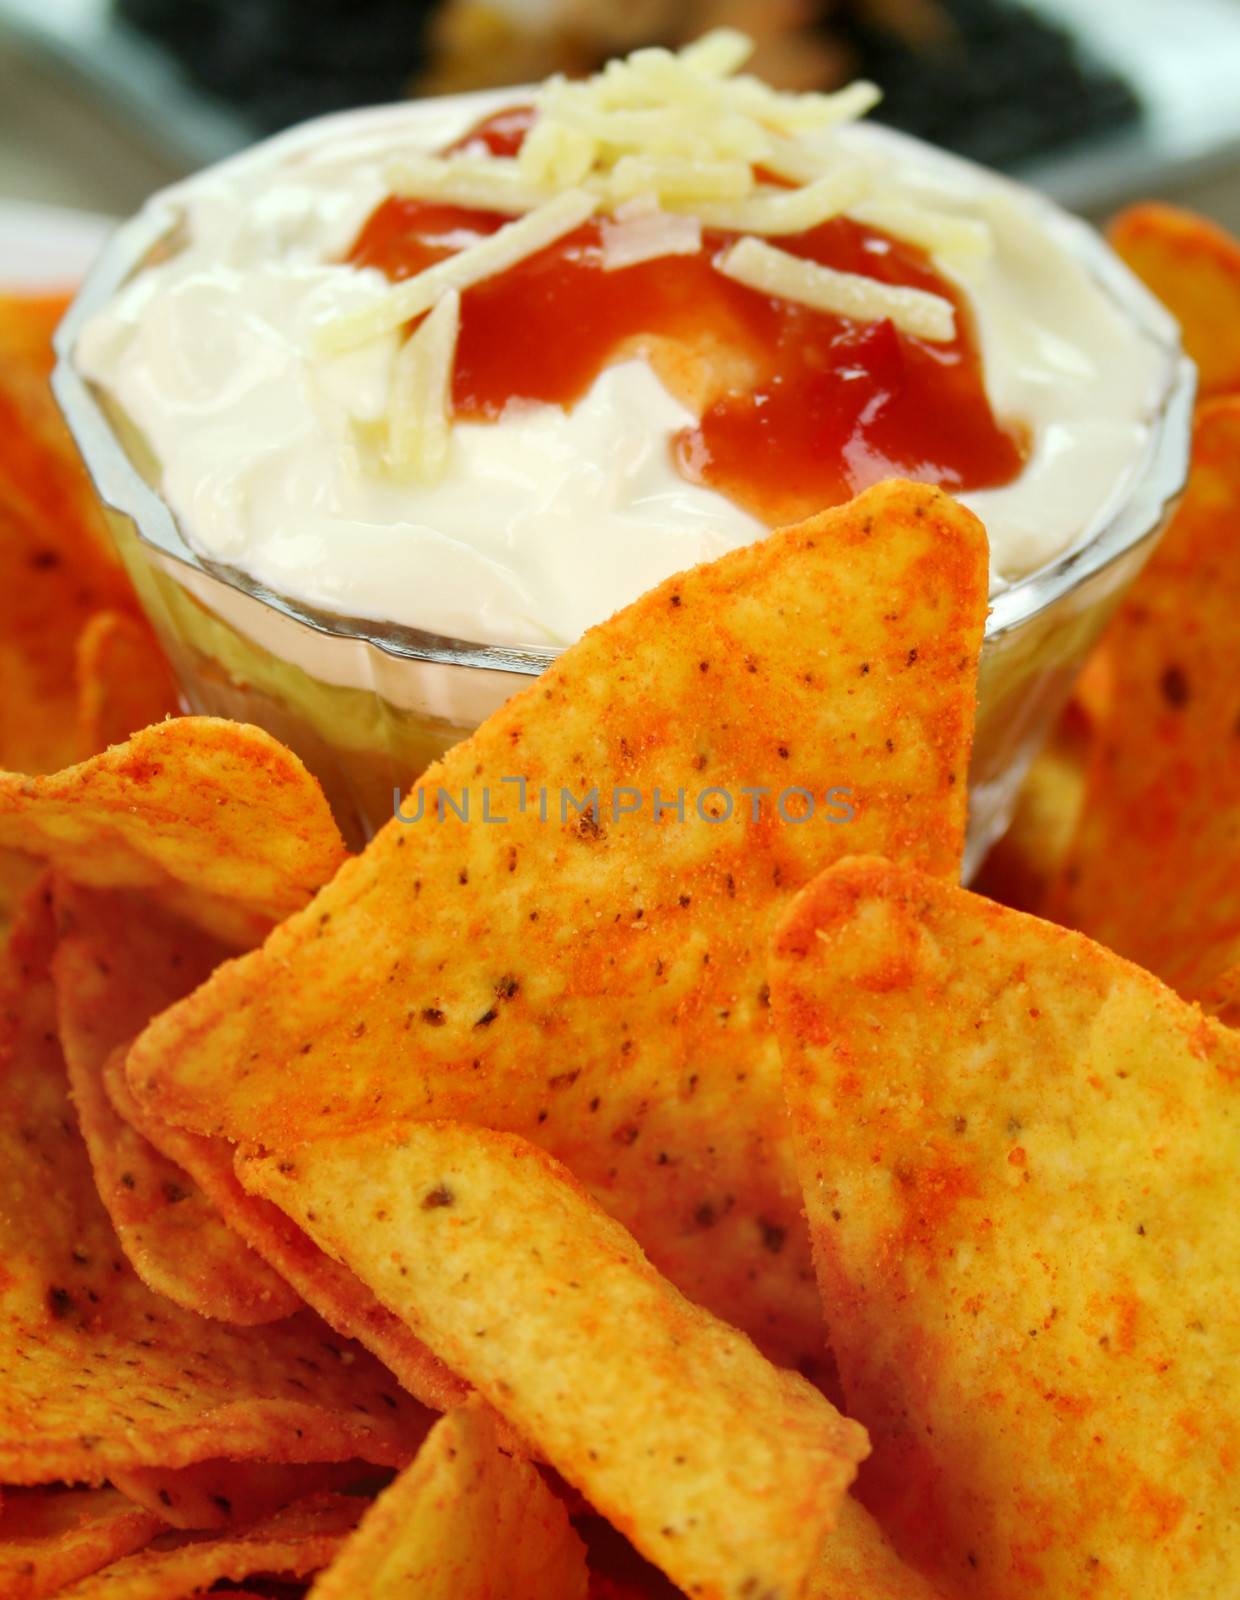 Nachos and Mexican dip topped with sour cream, salsa and grated cheese.